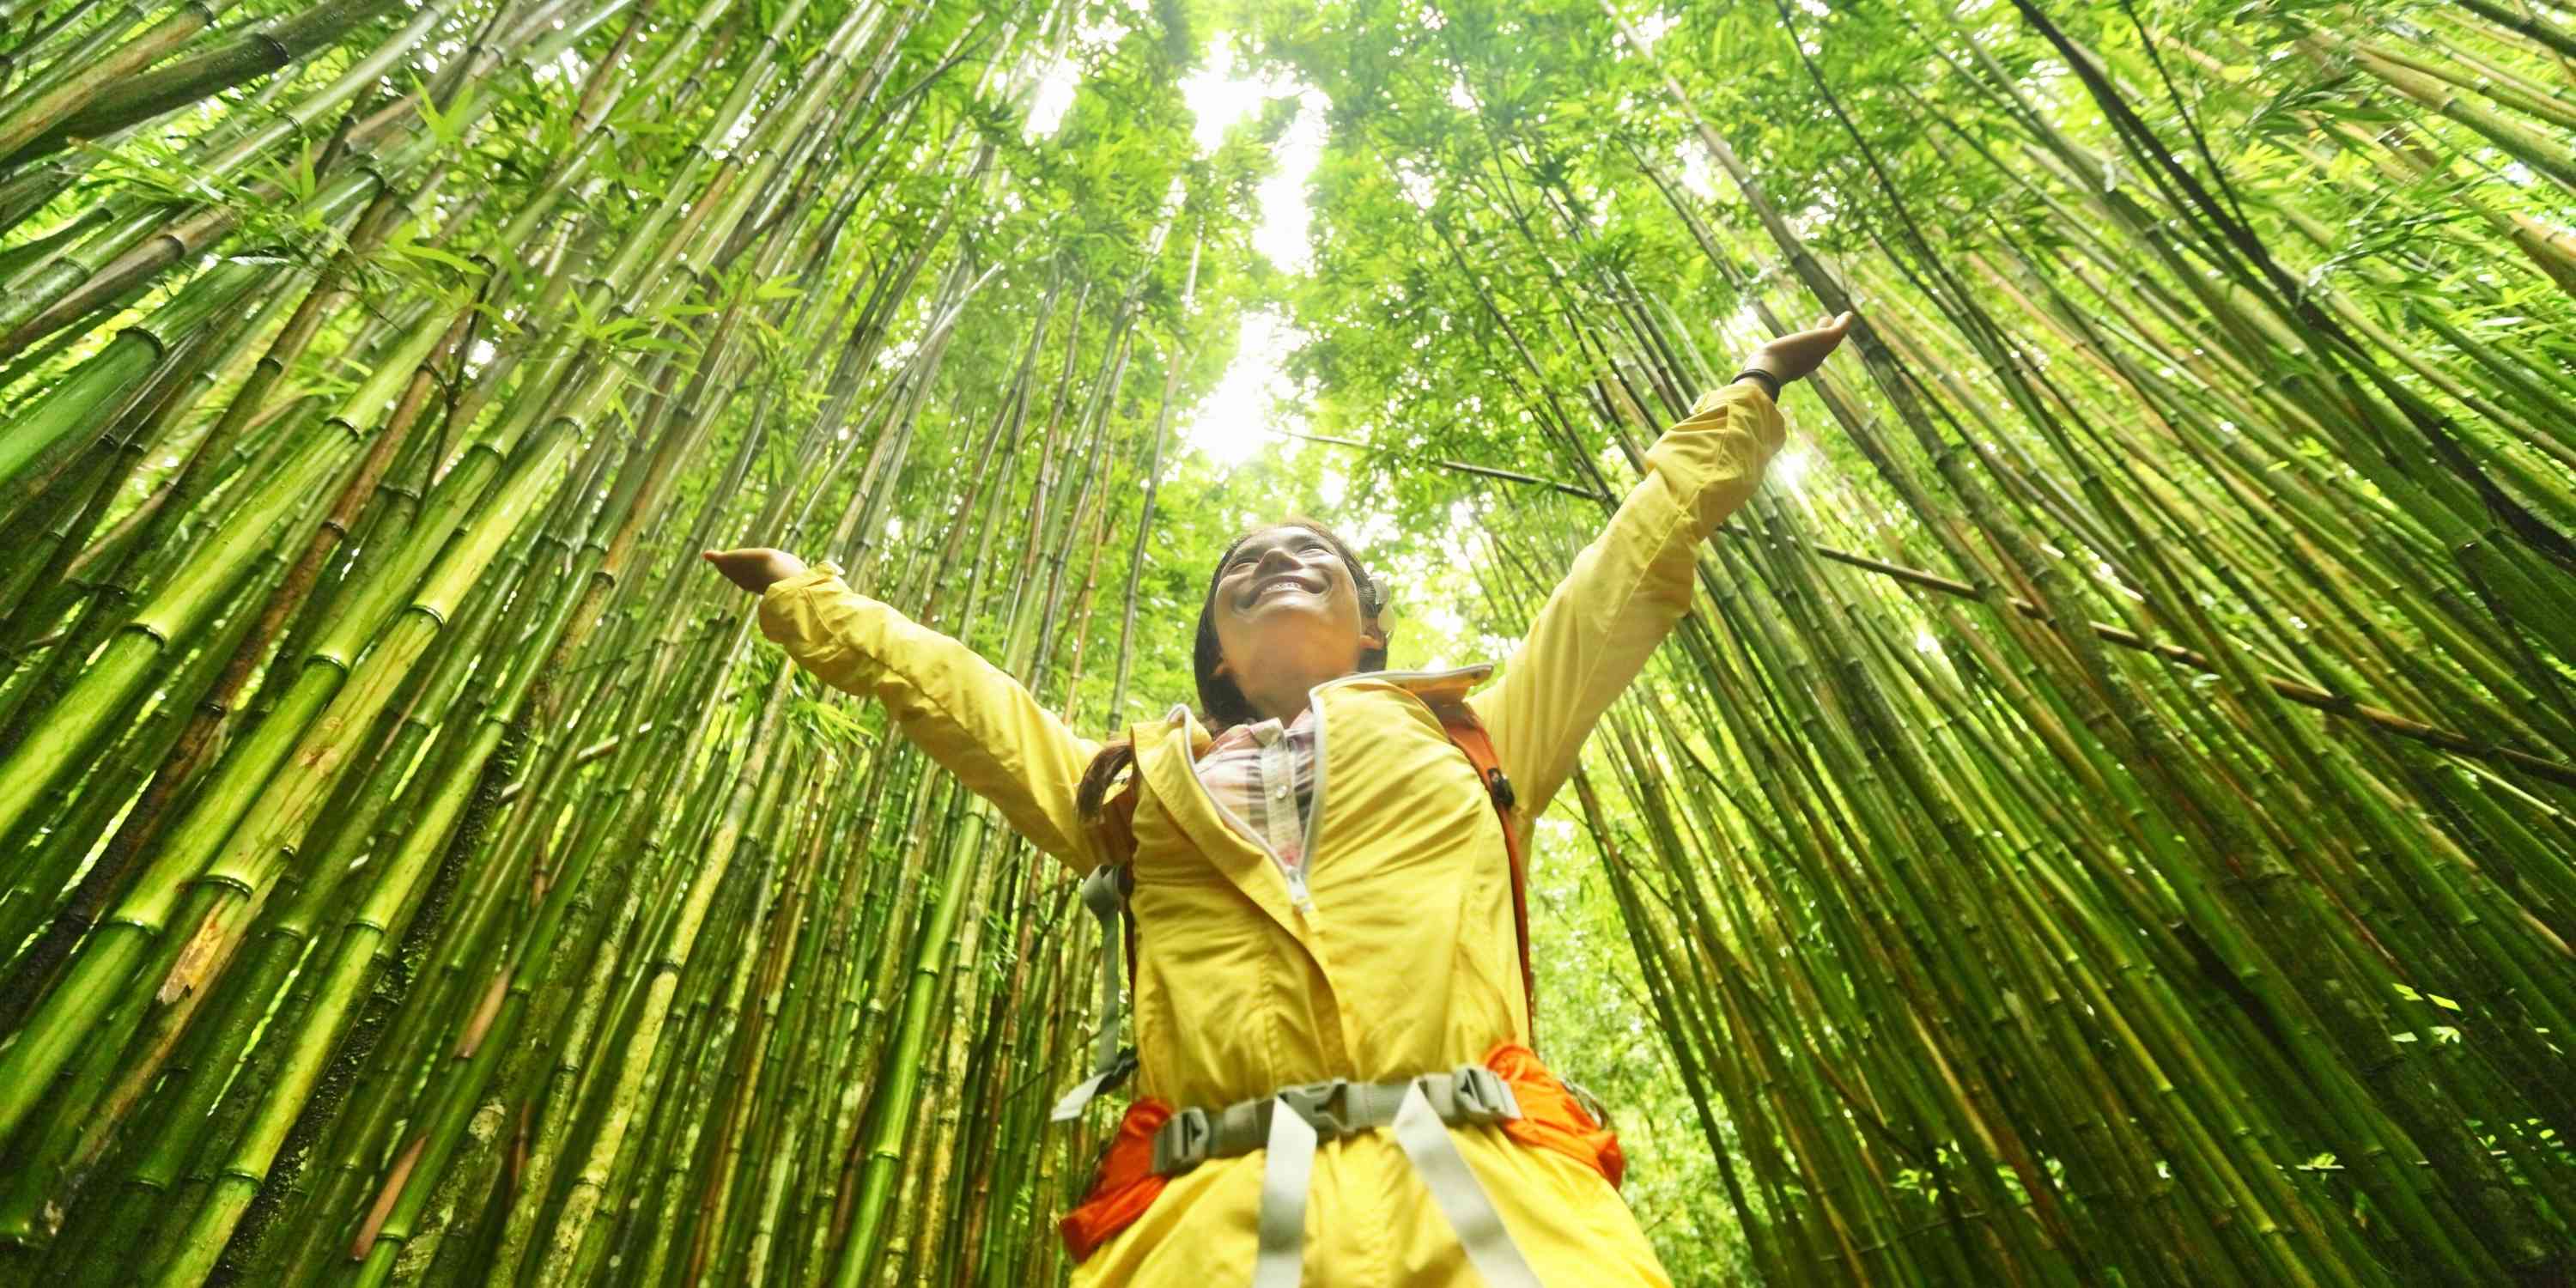 Woman raises her arms in a bamboo forest.